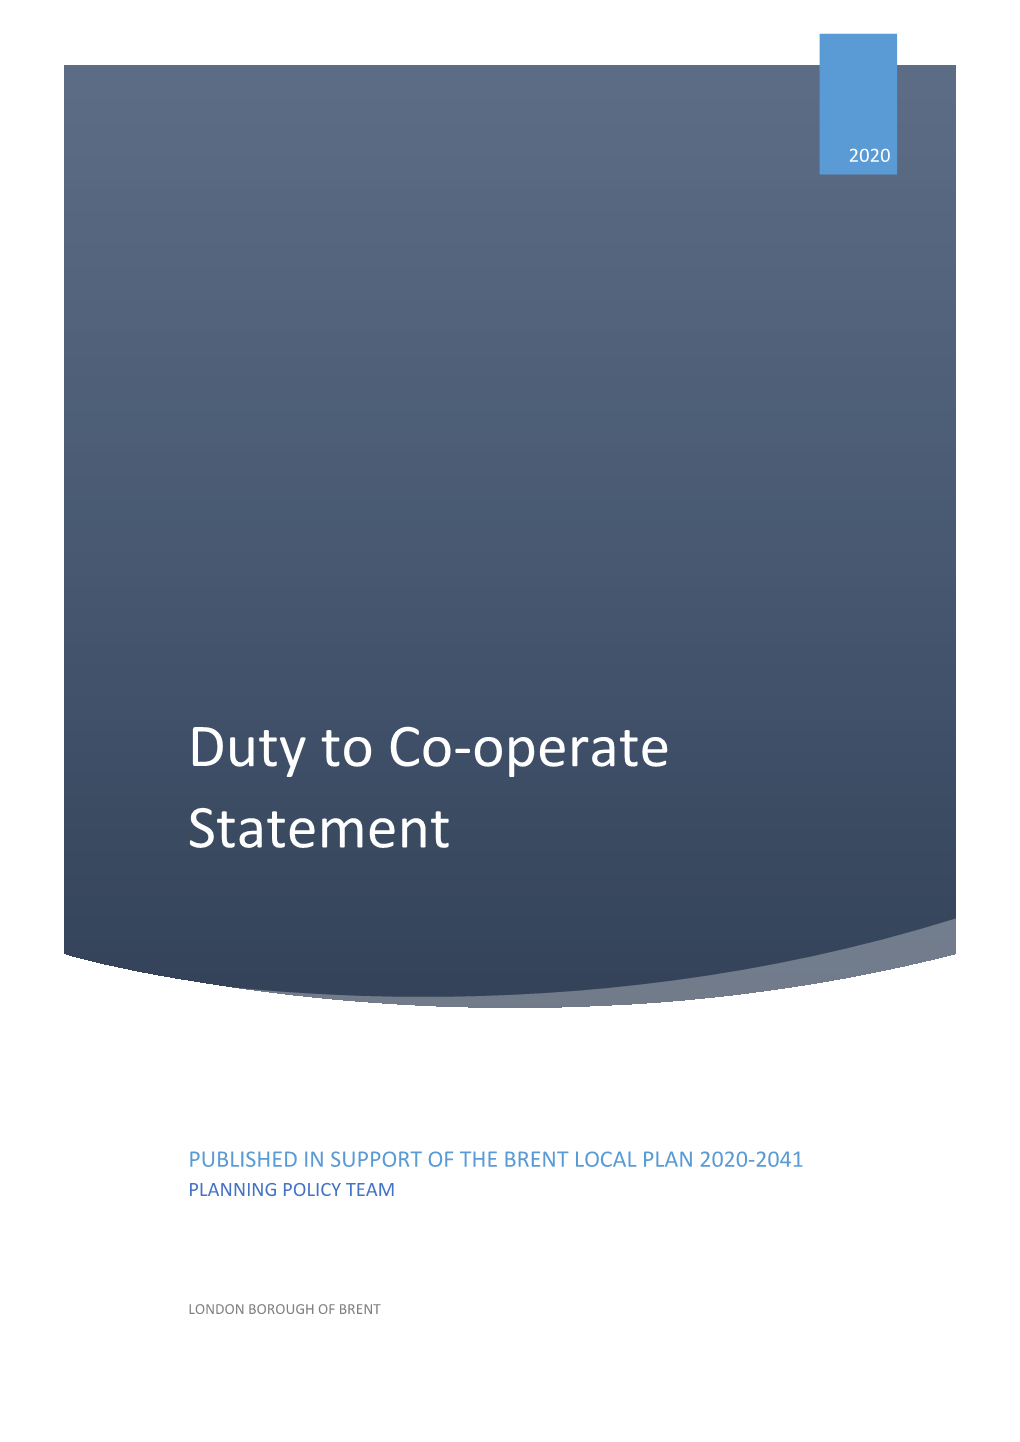 Dtc Statement (Duty to Cooperate)